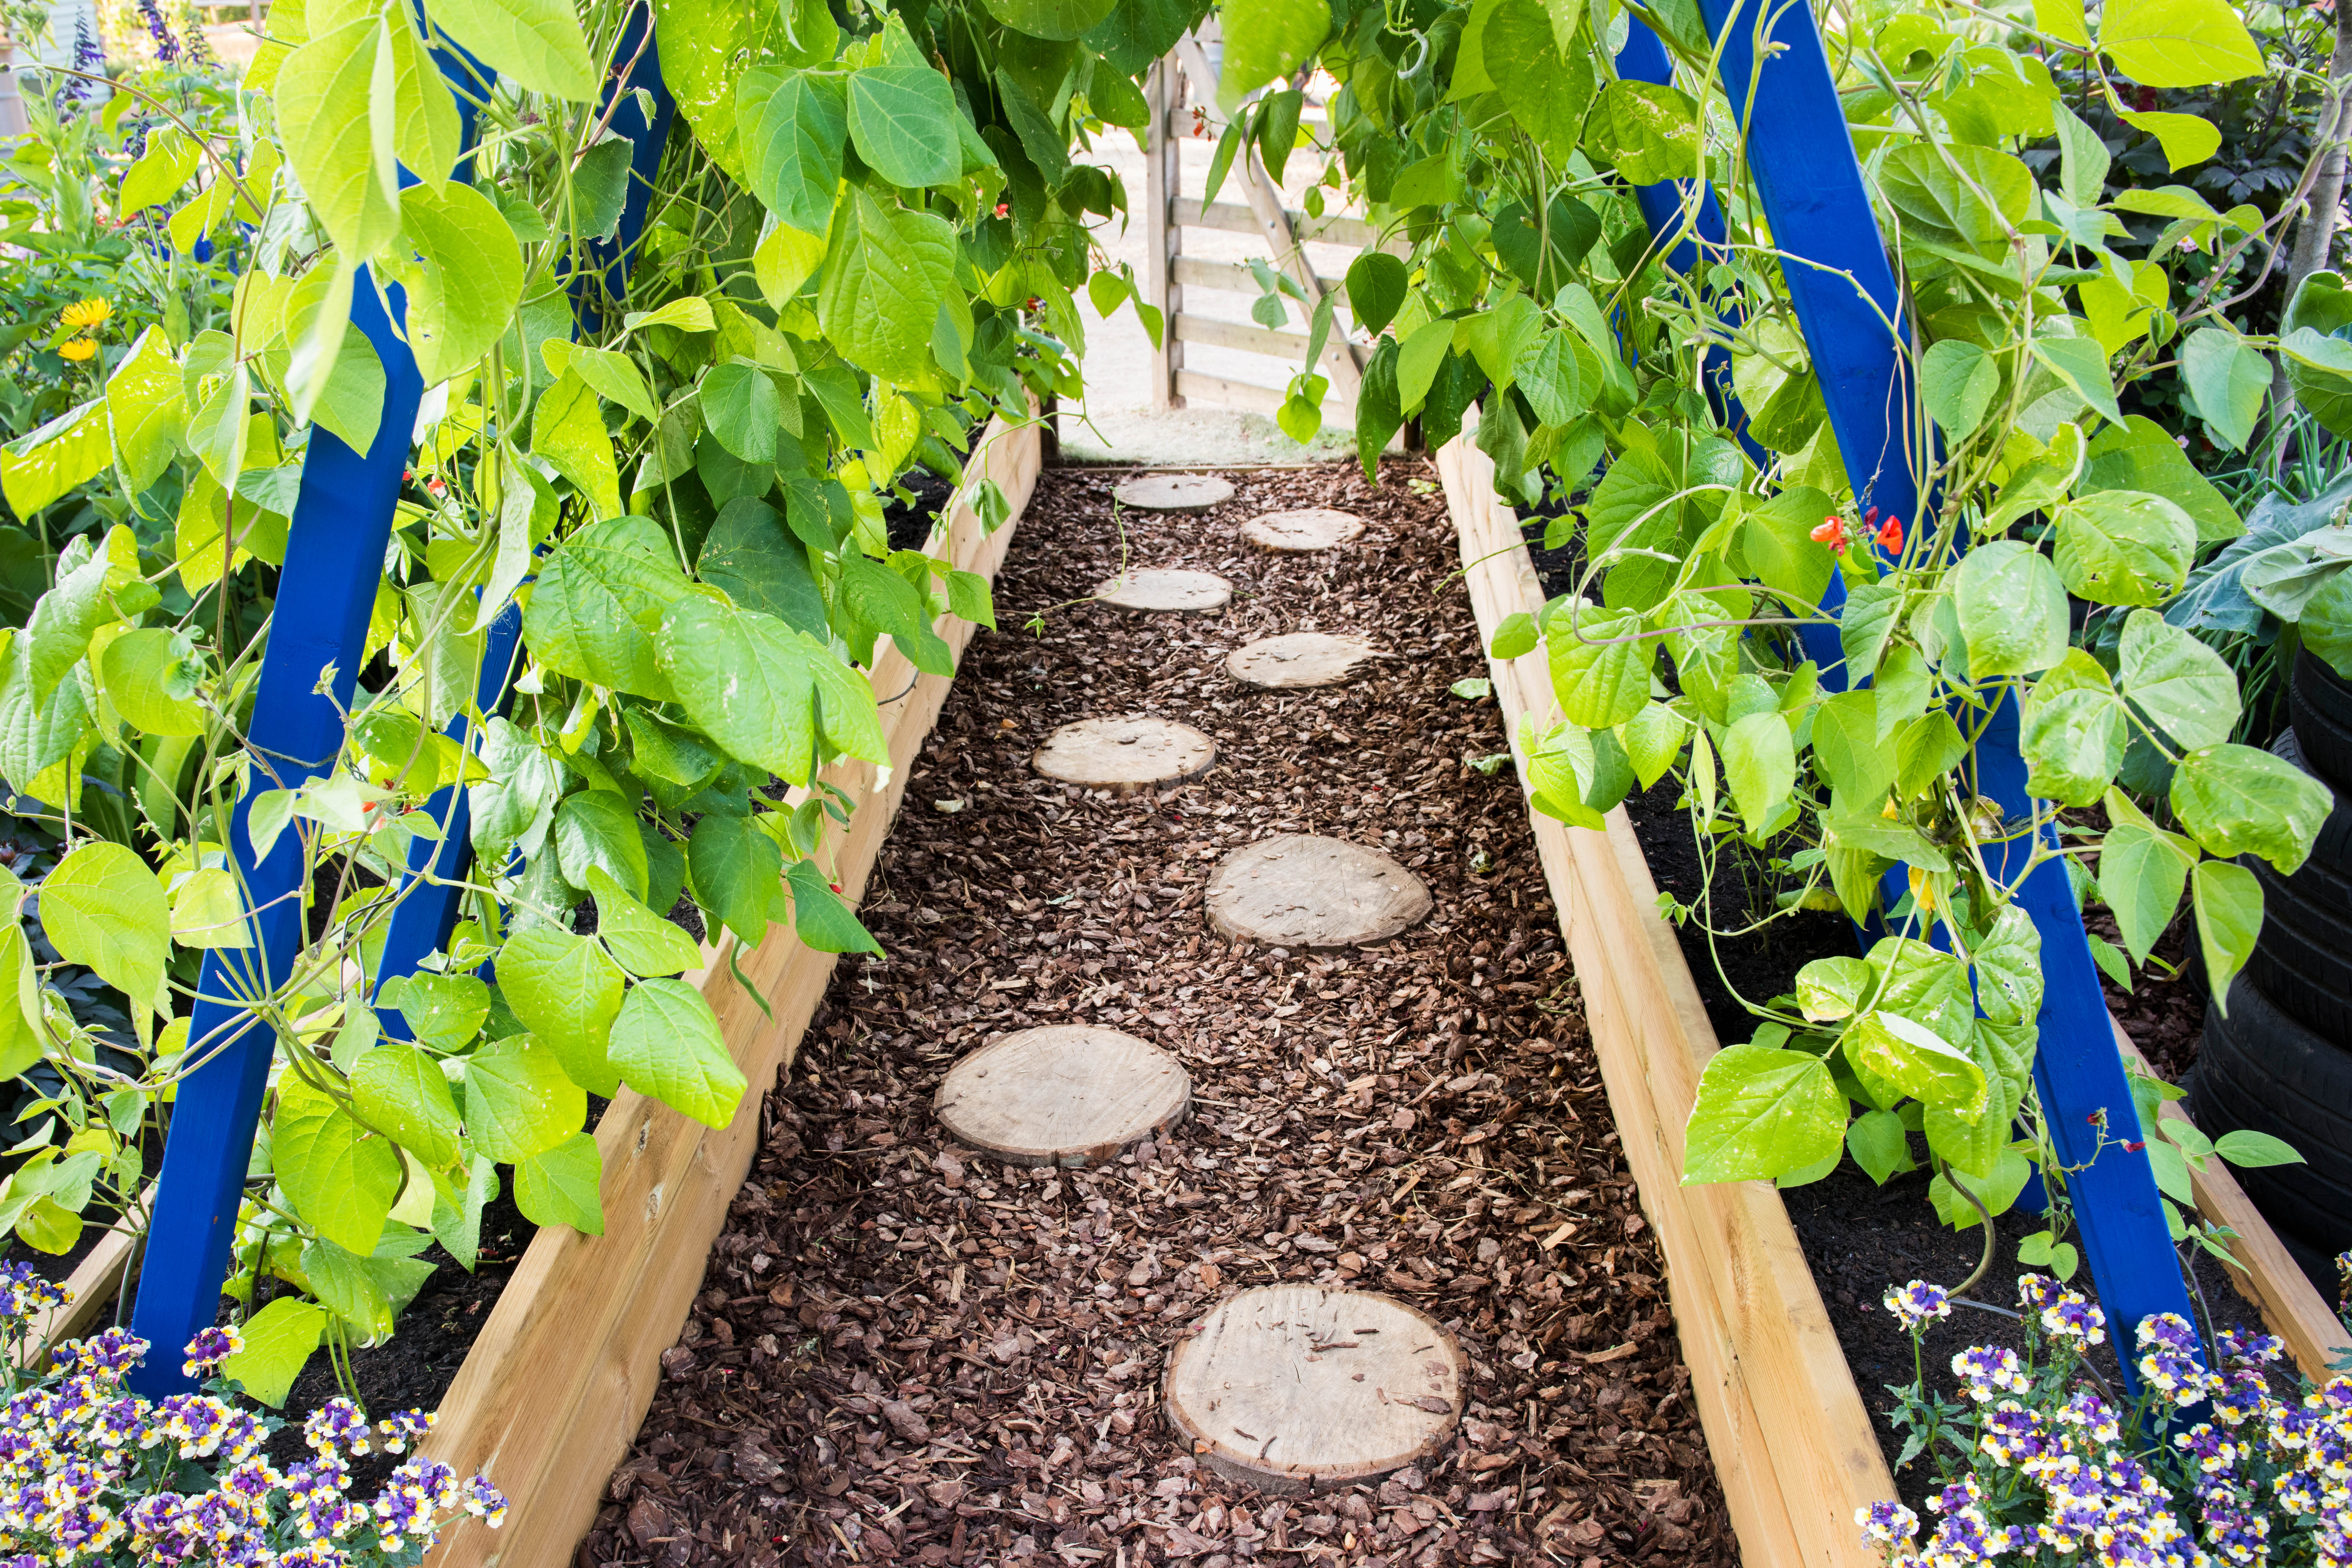 Path made from sliced logs between raised beds with runner beans. RHS Grow Your Own with The Raymond Blanc Gardening School, RHS Hampton Court Palace Flower Show, 2018.